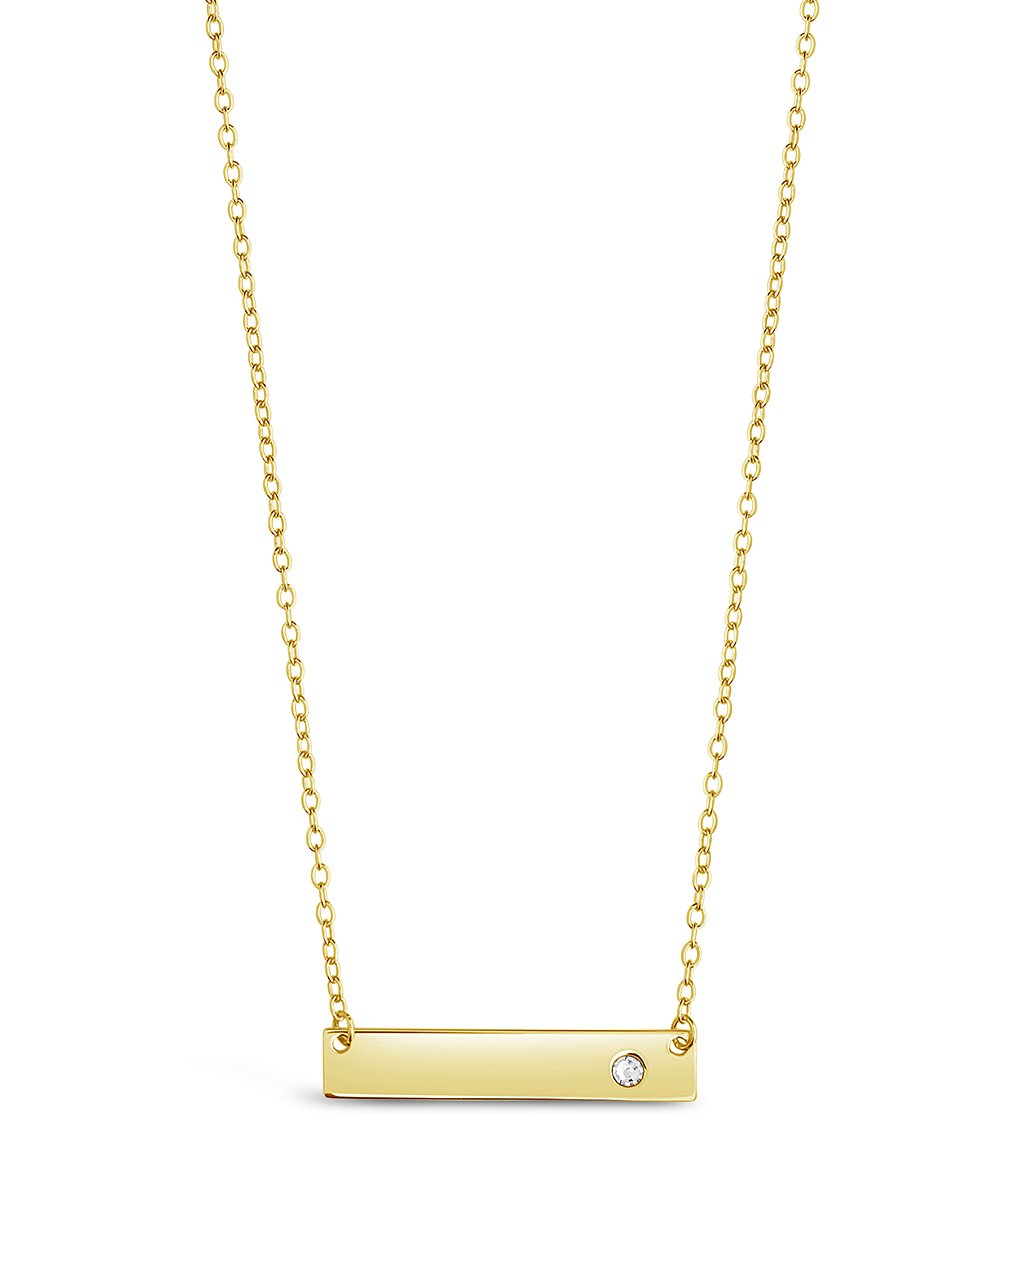 Sterling Silver CZ Studded Mini Bar Necklace - Sterling Forever